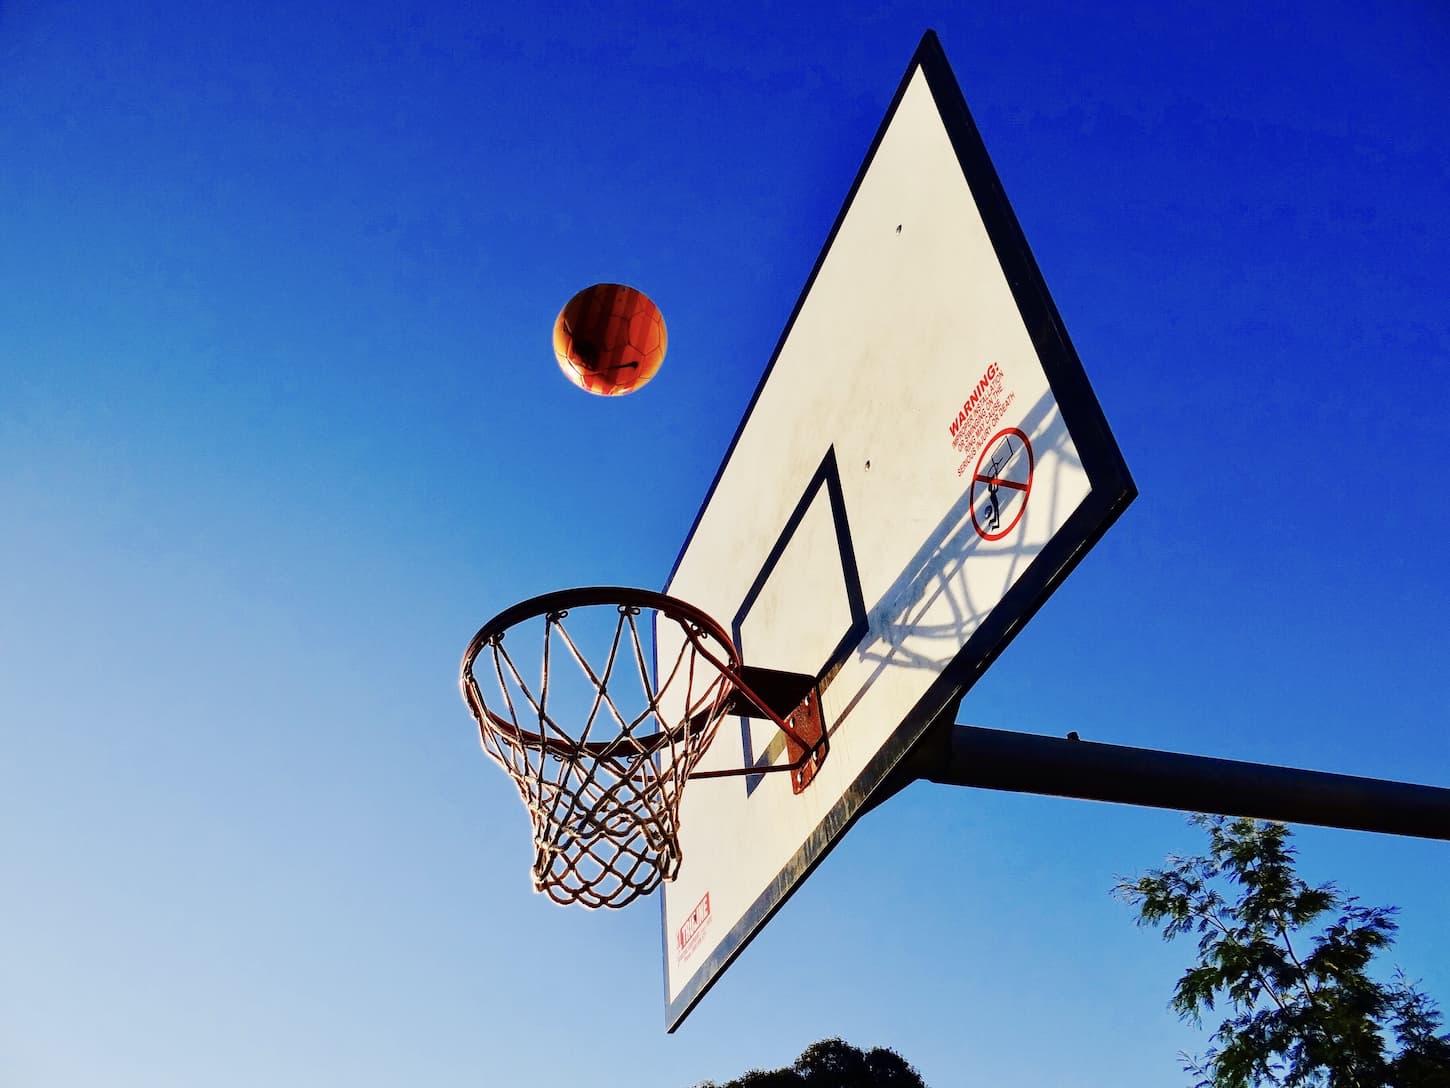 An image of basketball ring and a basket ball in a court.